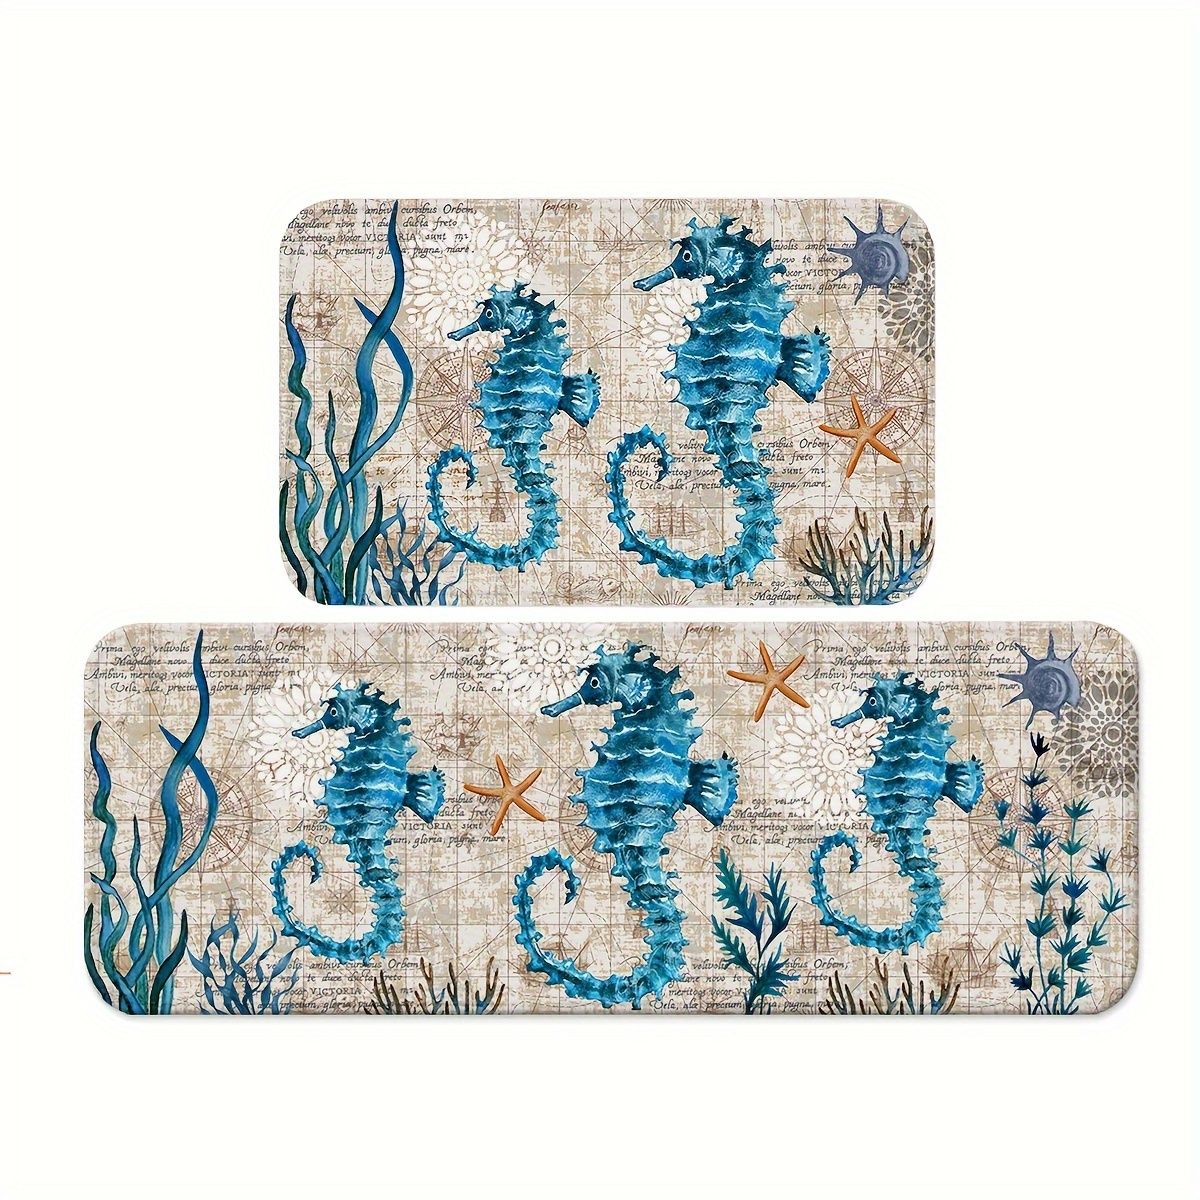 

Seahorse Printed Pattern Kitchen Floor Mats, Non-slip And Durable Bathroom Rug, Soft Comfortable Runner Rugs, Machine Washable Carpets For Kitchen, Home, Bathroom, Spring Decor Rug, Entrance Door Mat